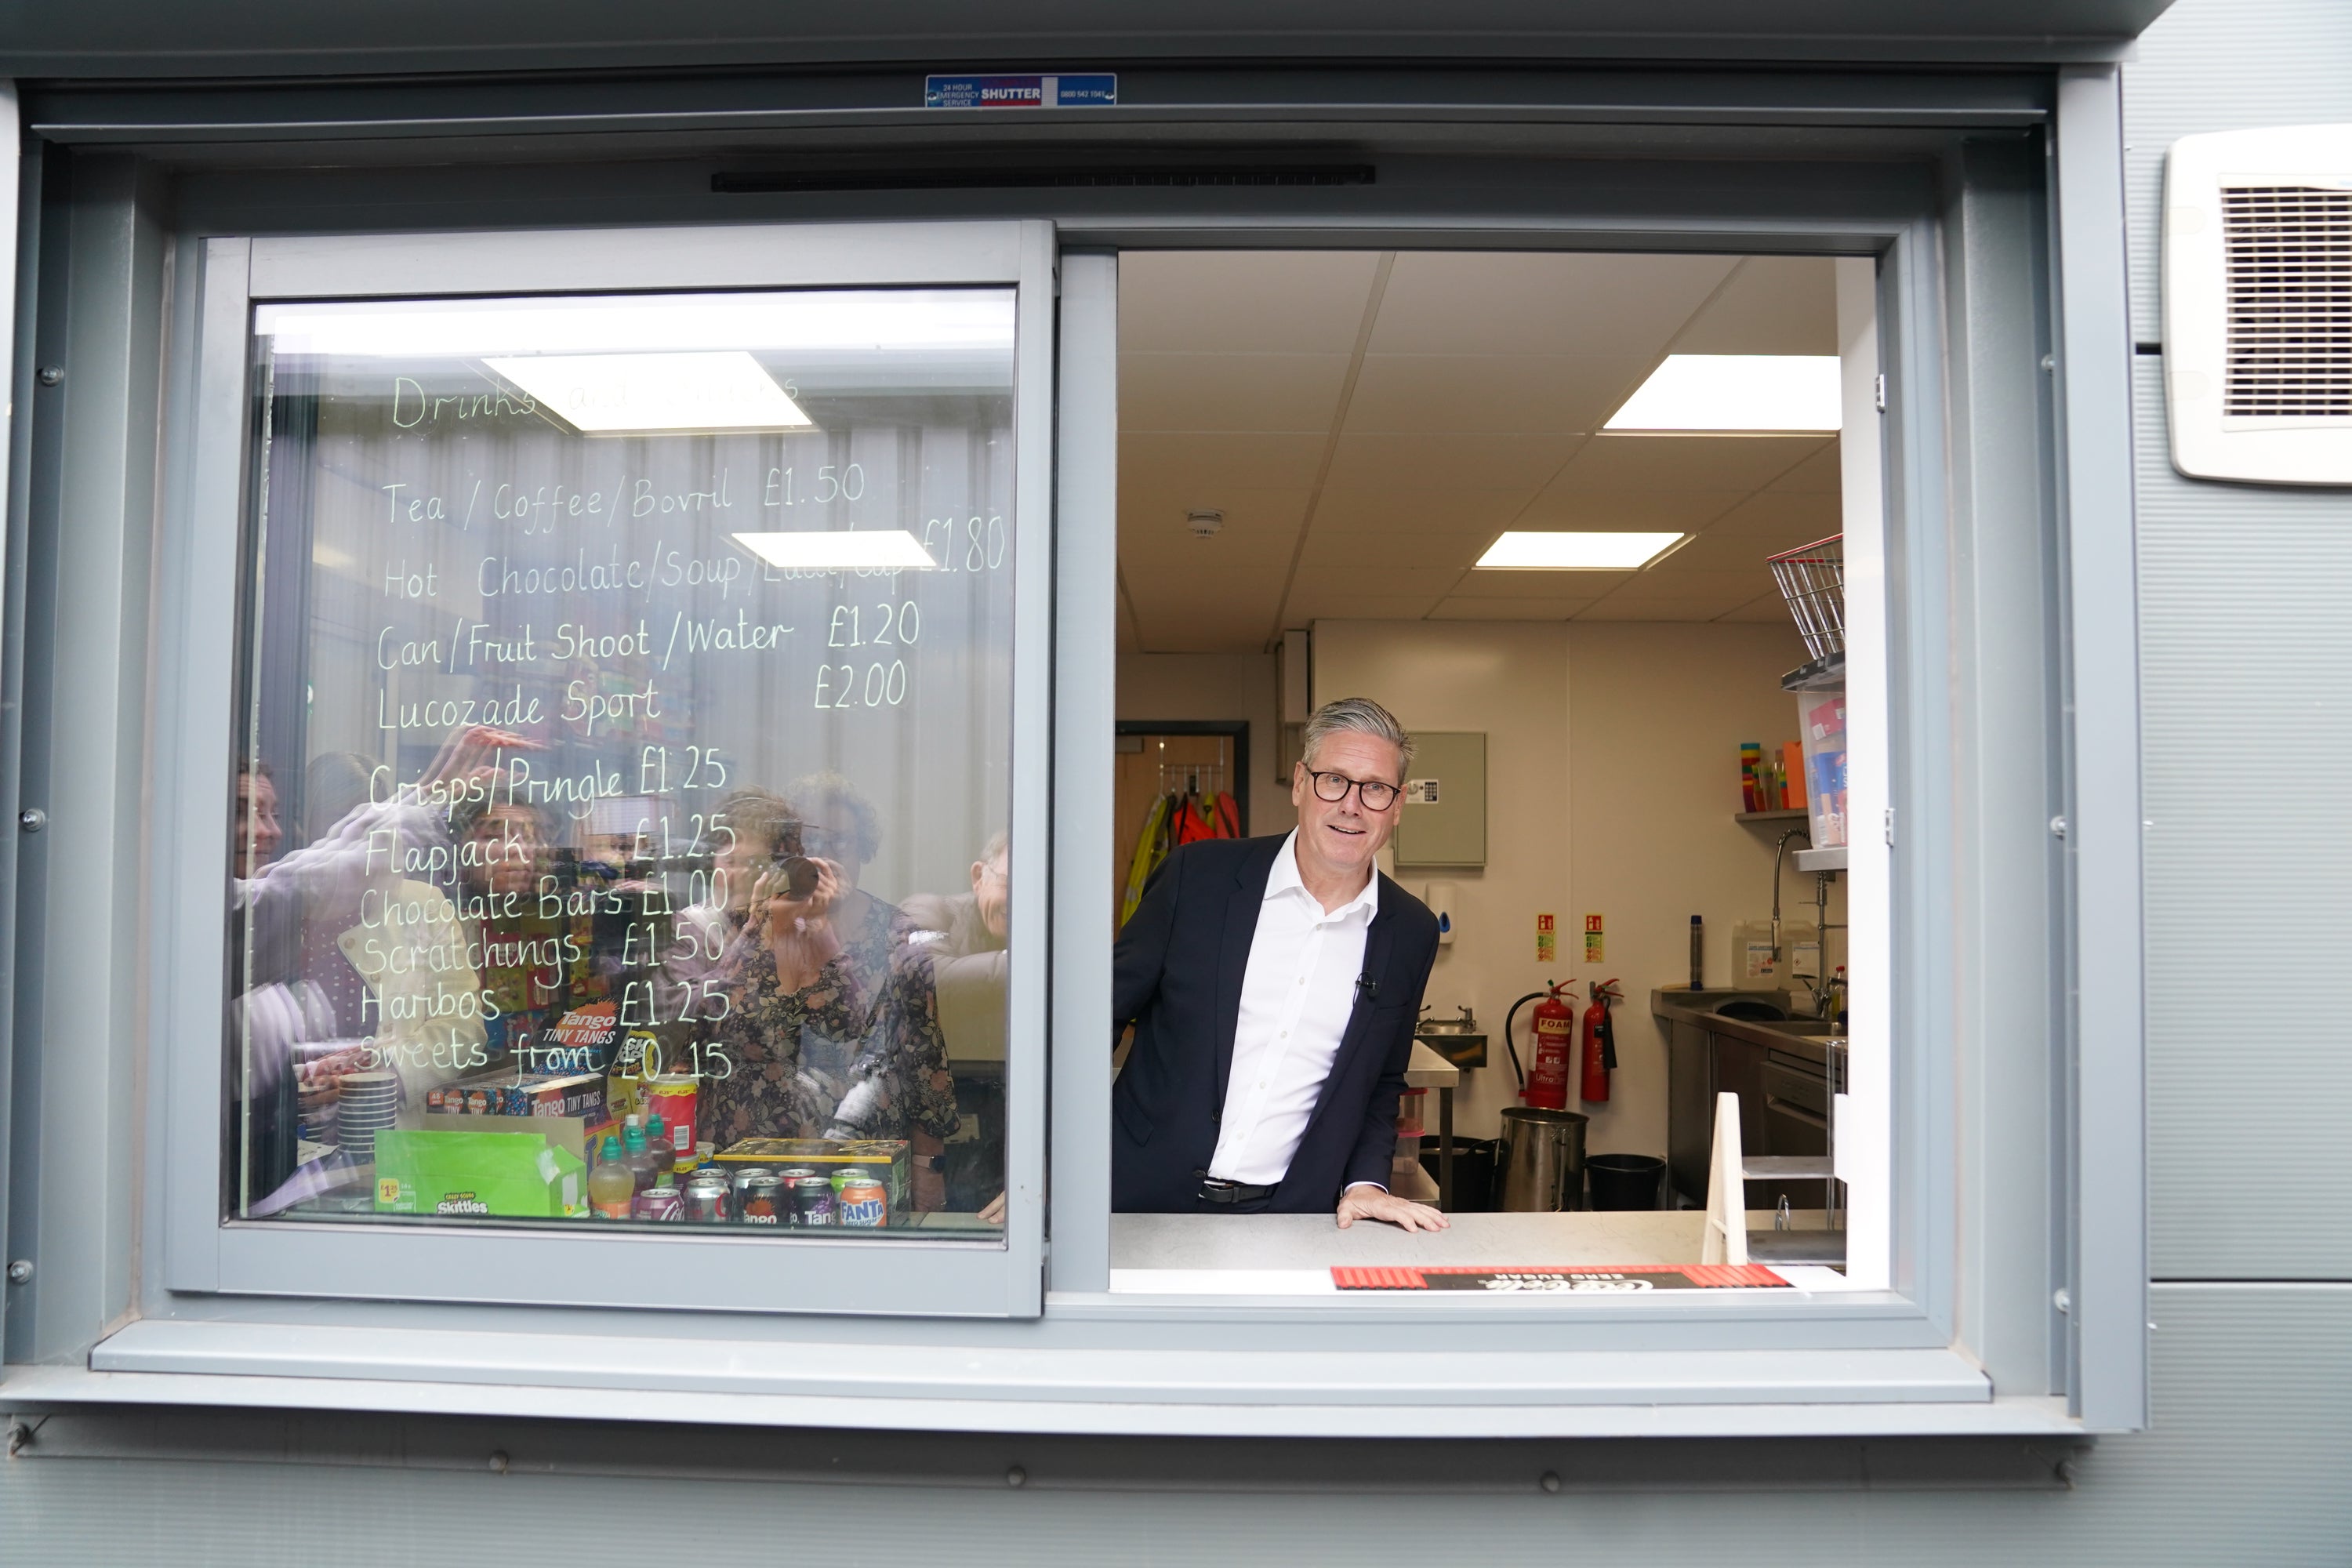 Sir Keir was on hand to dole out drinks during a visit to Hucknall Town FC in Nottinghamshire, as campaigning came to an end (Stefan Rousseau/PA)